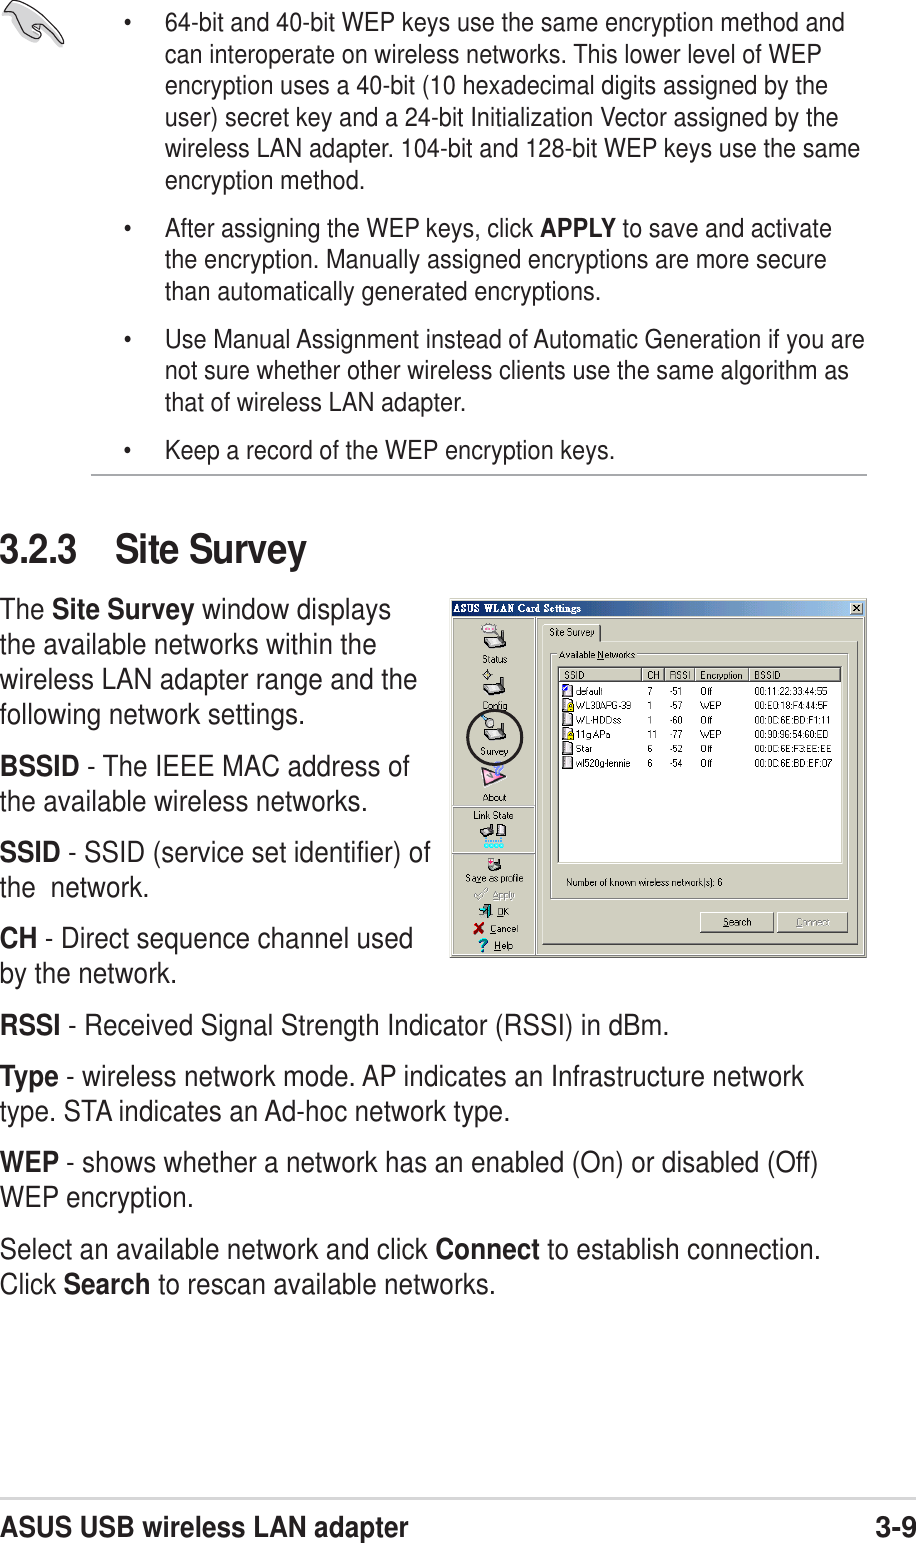 ASUS USB wireless LAN adapter3-9• 64-bit and 40-bit WEP keys use the same encryption method andcan interoperate on wireless networks. This lower level of WEPencryption uses a 40-bit (10 hexadecimal digits assigned by theuser) secret key and a 24-bit Initialization Vector assigned by thewireless LAN adapter. 104-bit and 128-bit WEP keys use the sameencryption method.• After assigning the WEP keys, click APPLY to save and activatethe encryption. Manually assigned encryptions are more securethan automatically generated encryptions.• Use Manual Assignment instead of Automatic Generation if you arenot sure whether other wireless clients use the same algorithm asthat of wireless LAN adapter.• Keep a record of the WEP encryption keys.3.2.3 Site SurveyThe Site Survey window displaysthe available networks within thewireless LAN adapter range and thefollowing network settings.BSSID - The IEEE MAC address ofthe available wireless networks.SSID - SSID (service set identifier) ofthe  network.CH - Direct sequence channel usedby the network.RSSI - Received Signal Strength Indicator (RSSI) in dBm.Type - wireless network mode. AP indicates an Infrastructure networktype. STA indicates an Ad-hoc network type.WEP - shows whether a network has an enabled (On) or disabled (Off)WEP encryption.Select an available network and click Connect to establish connection.Click Search to rescan available networks.